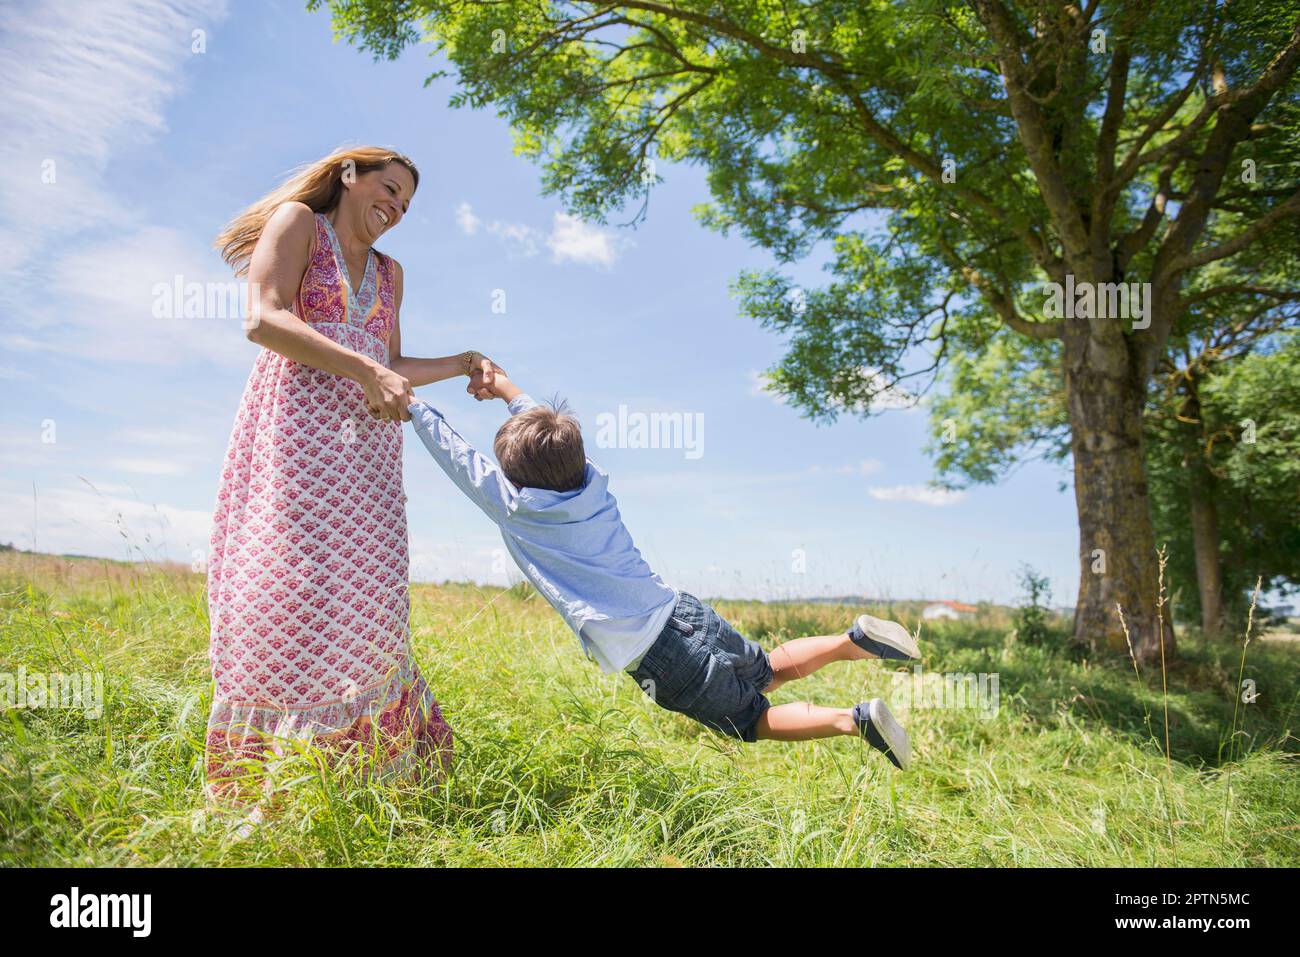 Woman swinging boy on meadow in picnic, Bavaria, Germany Stock Photo